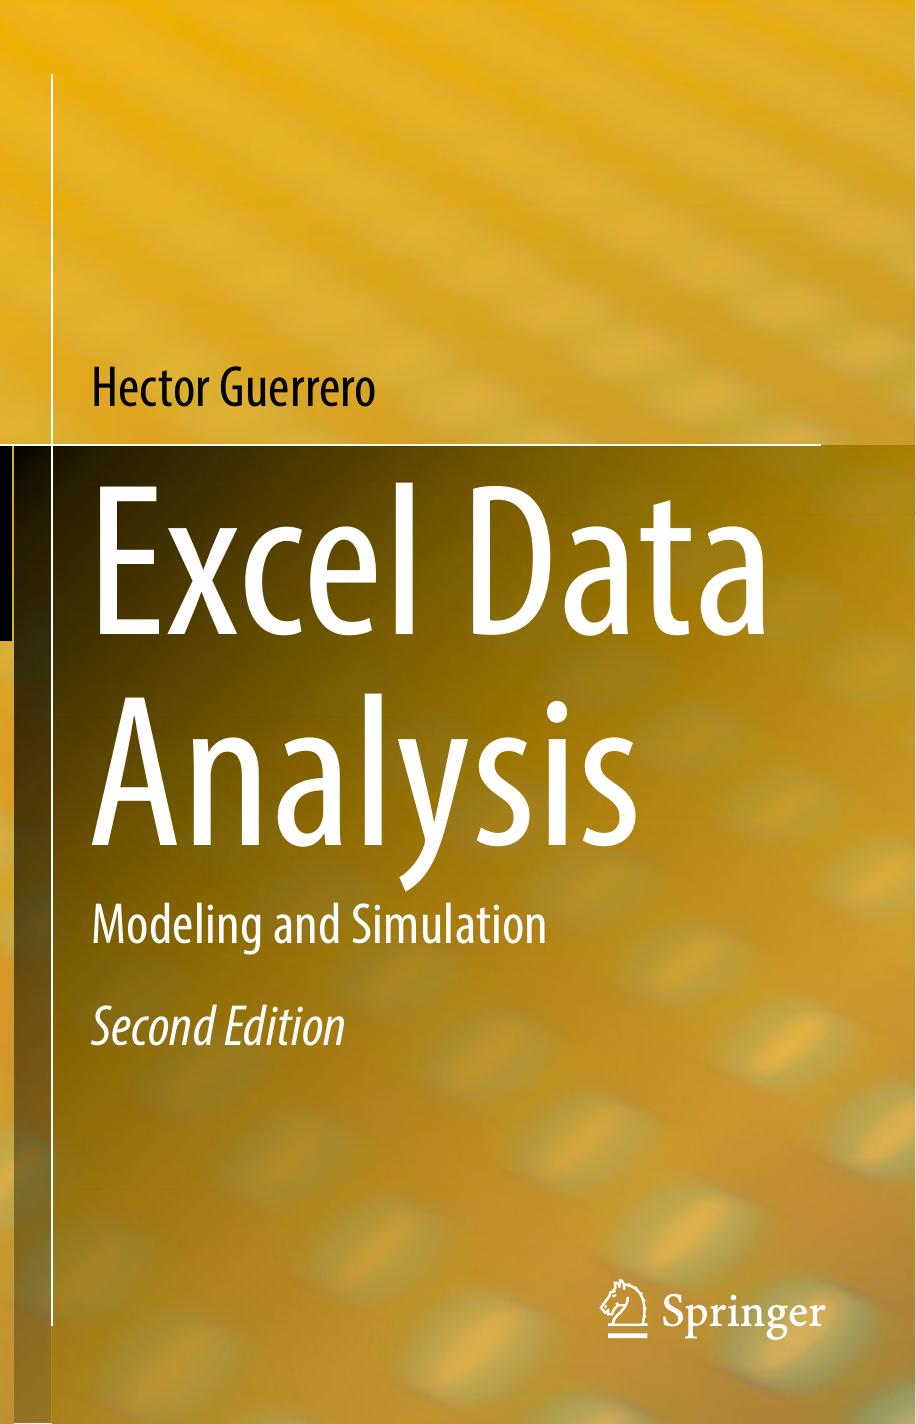 Excel Data Analysis by Hector Guerrero